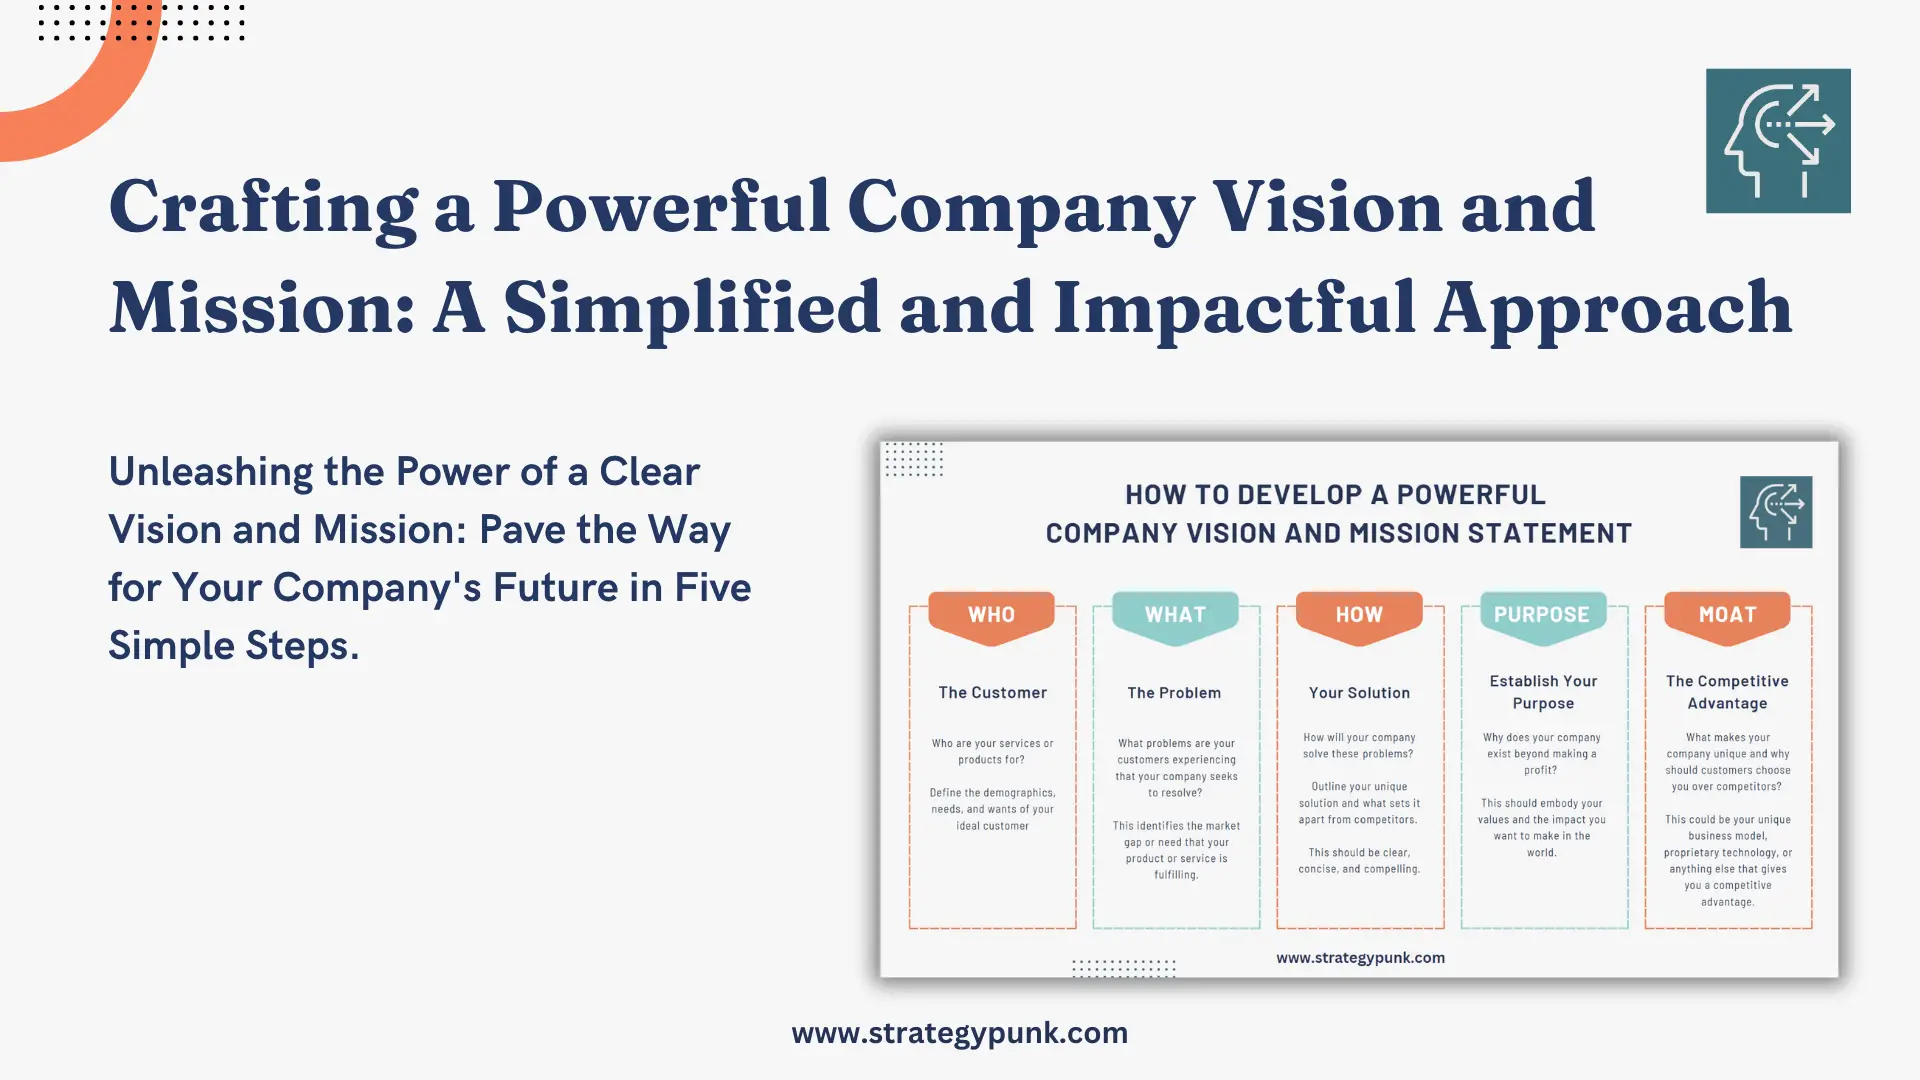 Crafting a Powerful Company Vision and Mission Statement (Free Template)